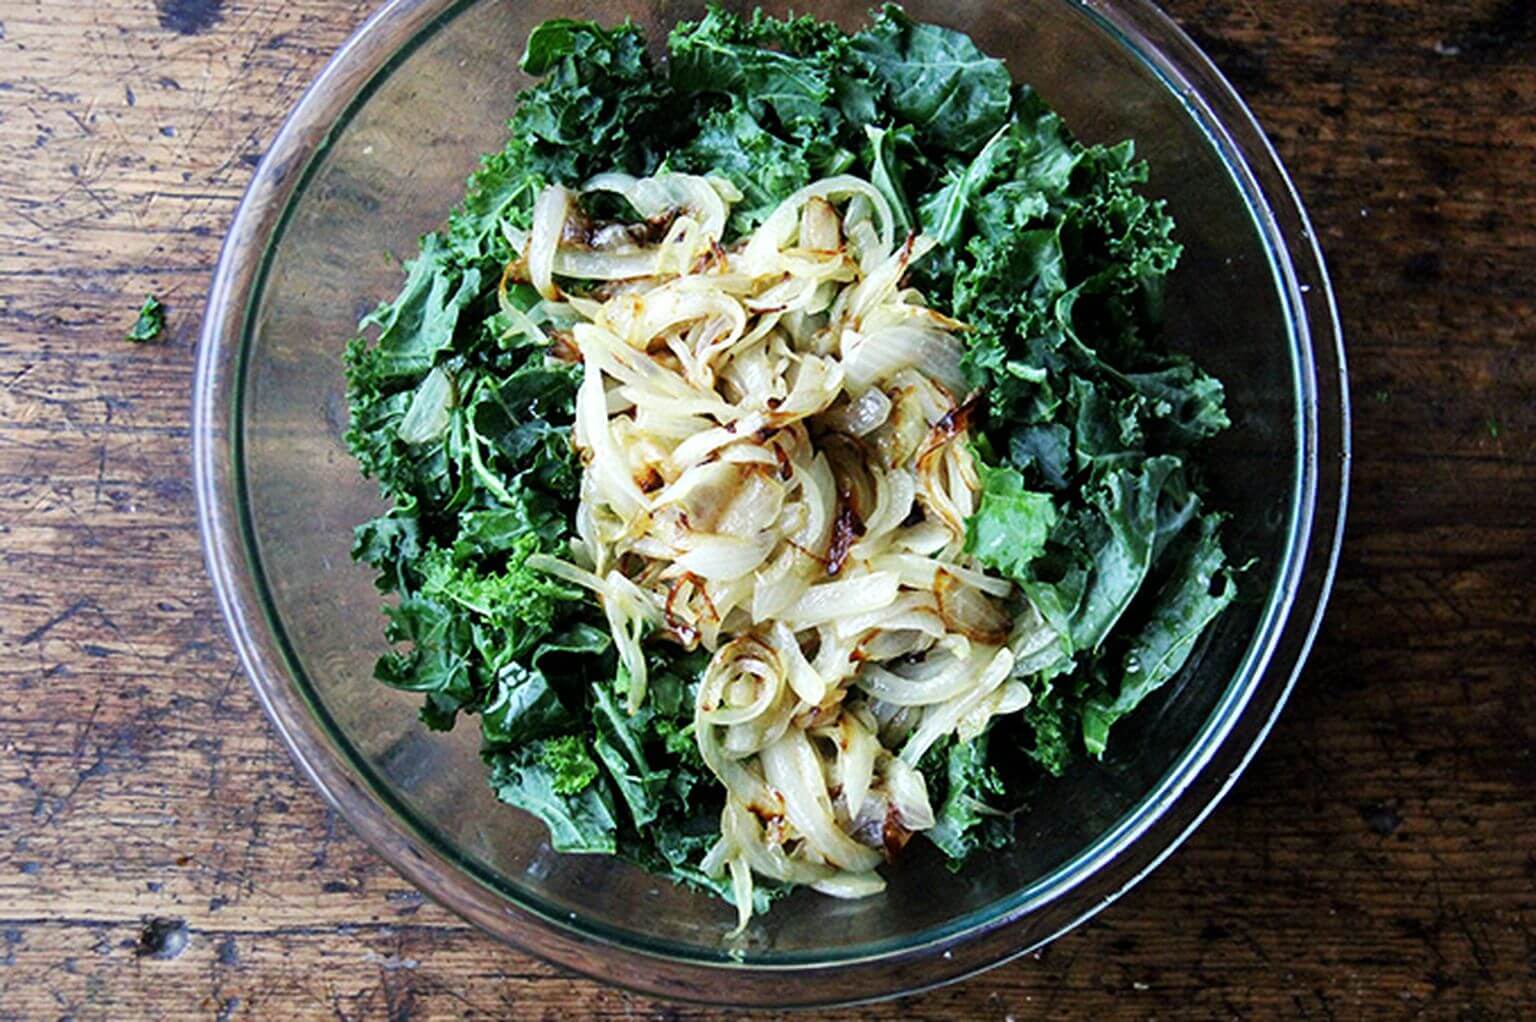 An overhead shot of a glass bowl filled with raw kale and caramelized onions.